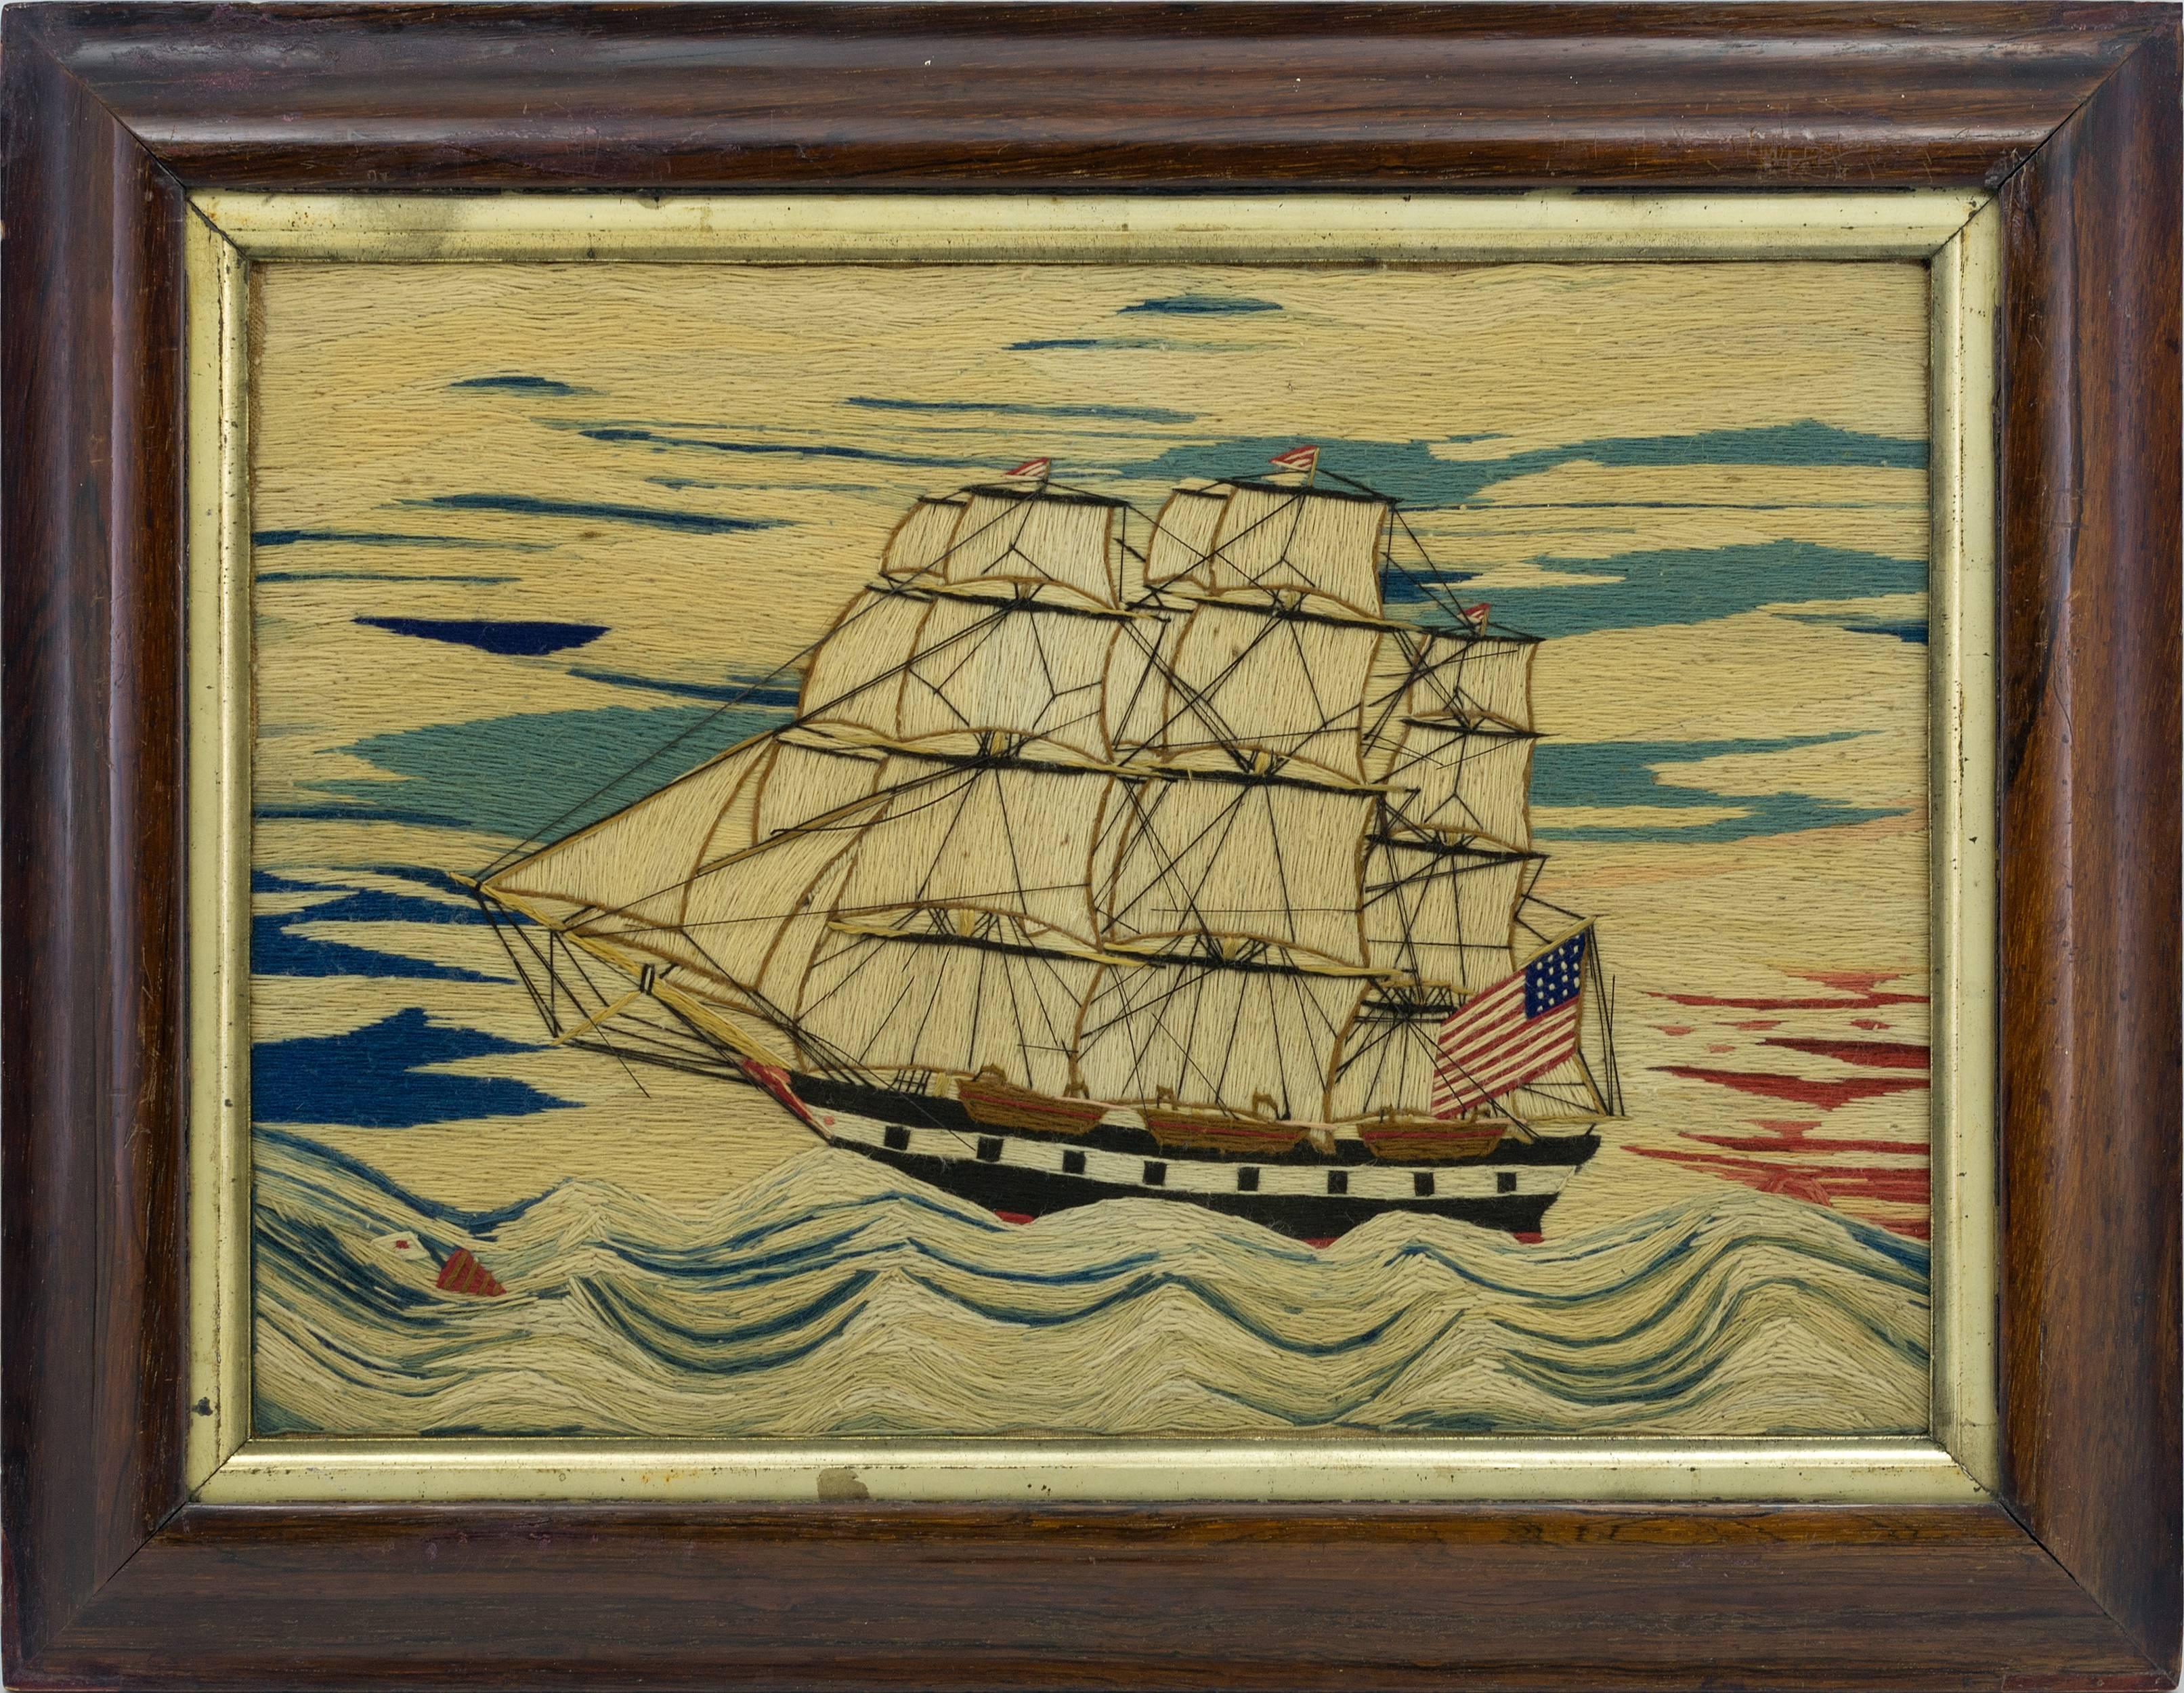 Extremely rare and important pair of woolwork pictures depicting American whale ships.
The first picture depicts a brown-hulled whale ship with false gunports. The port view
depicts whalemen on the 